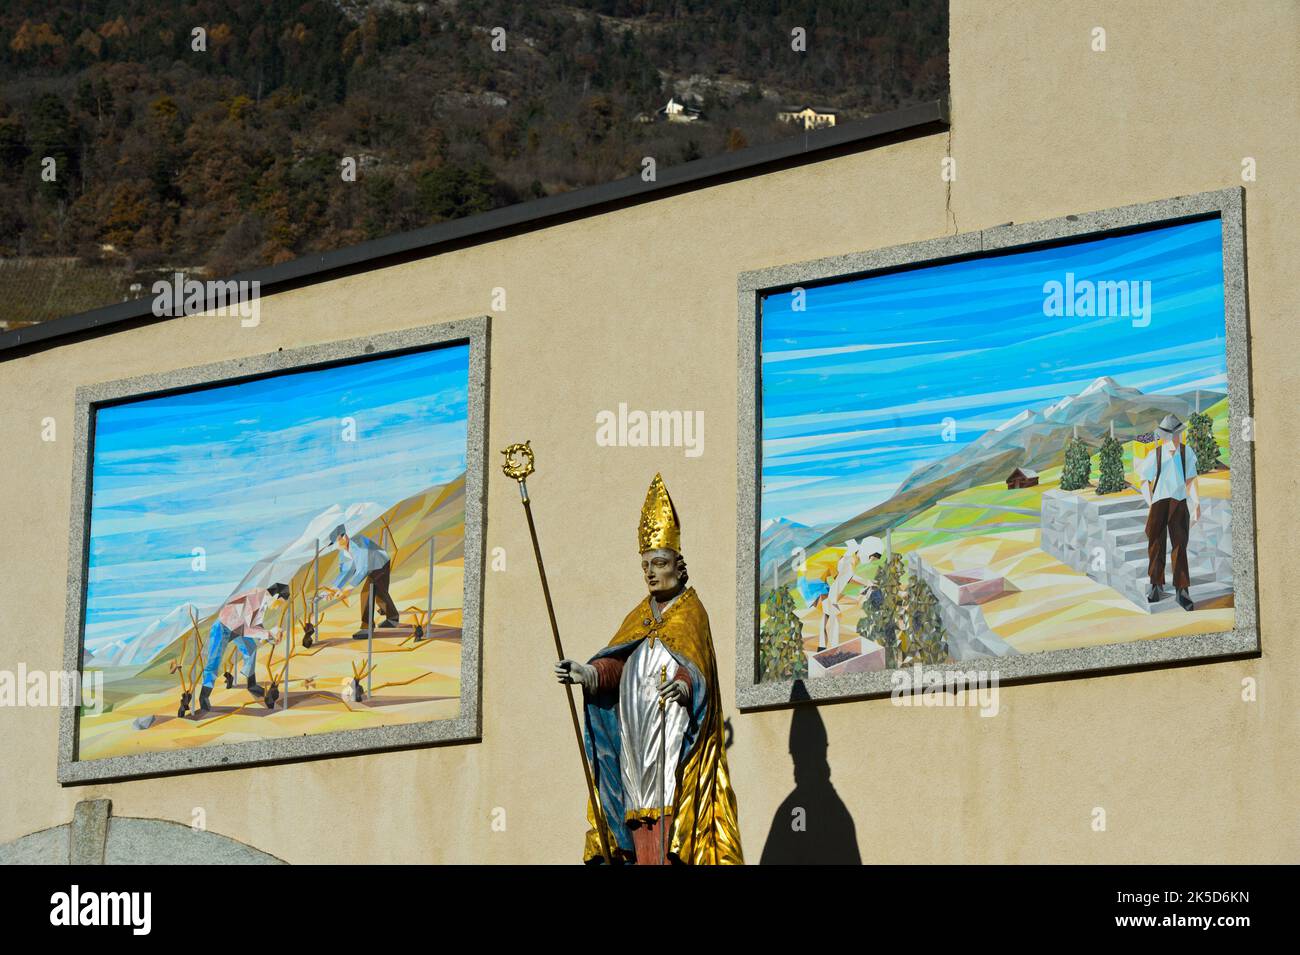 Statue of St. Theodul, first bishop of Valais and patron of winegrowers, in front of pictures with scenes of winegrowing at the former abbey of Vetroz, Vetroz, Valais, Switzerland Stock Photo